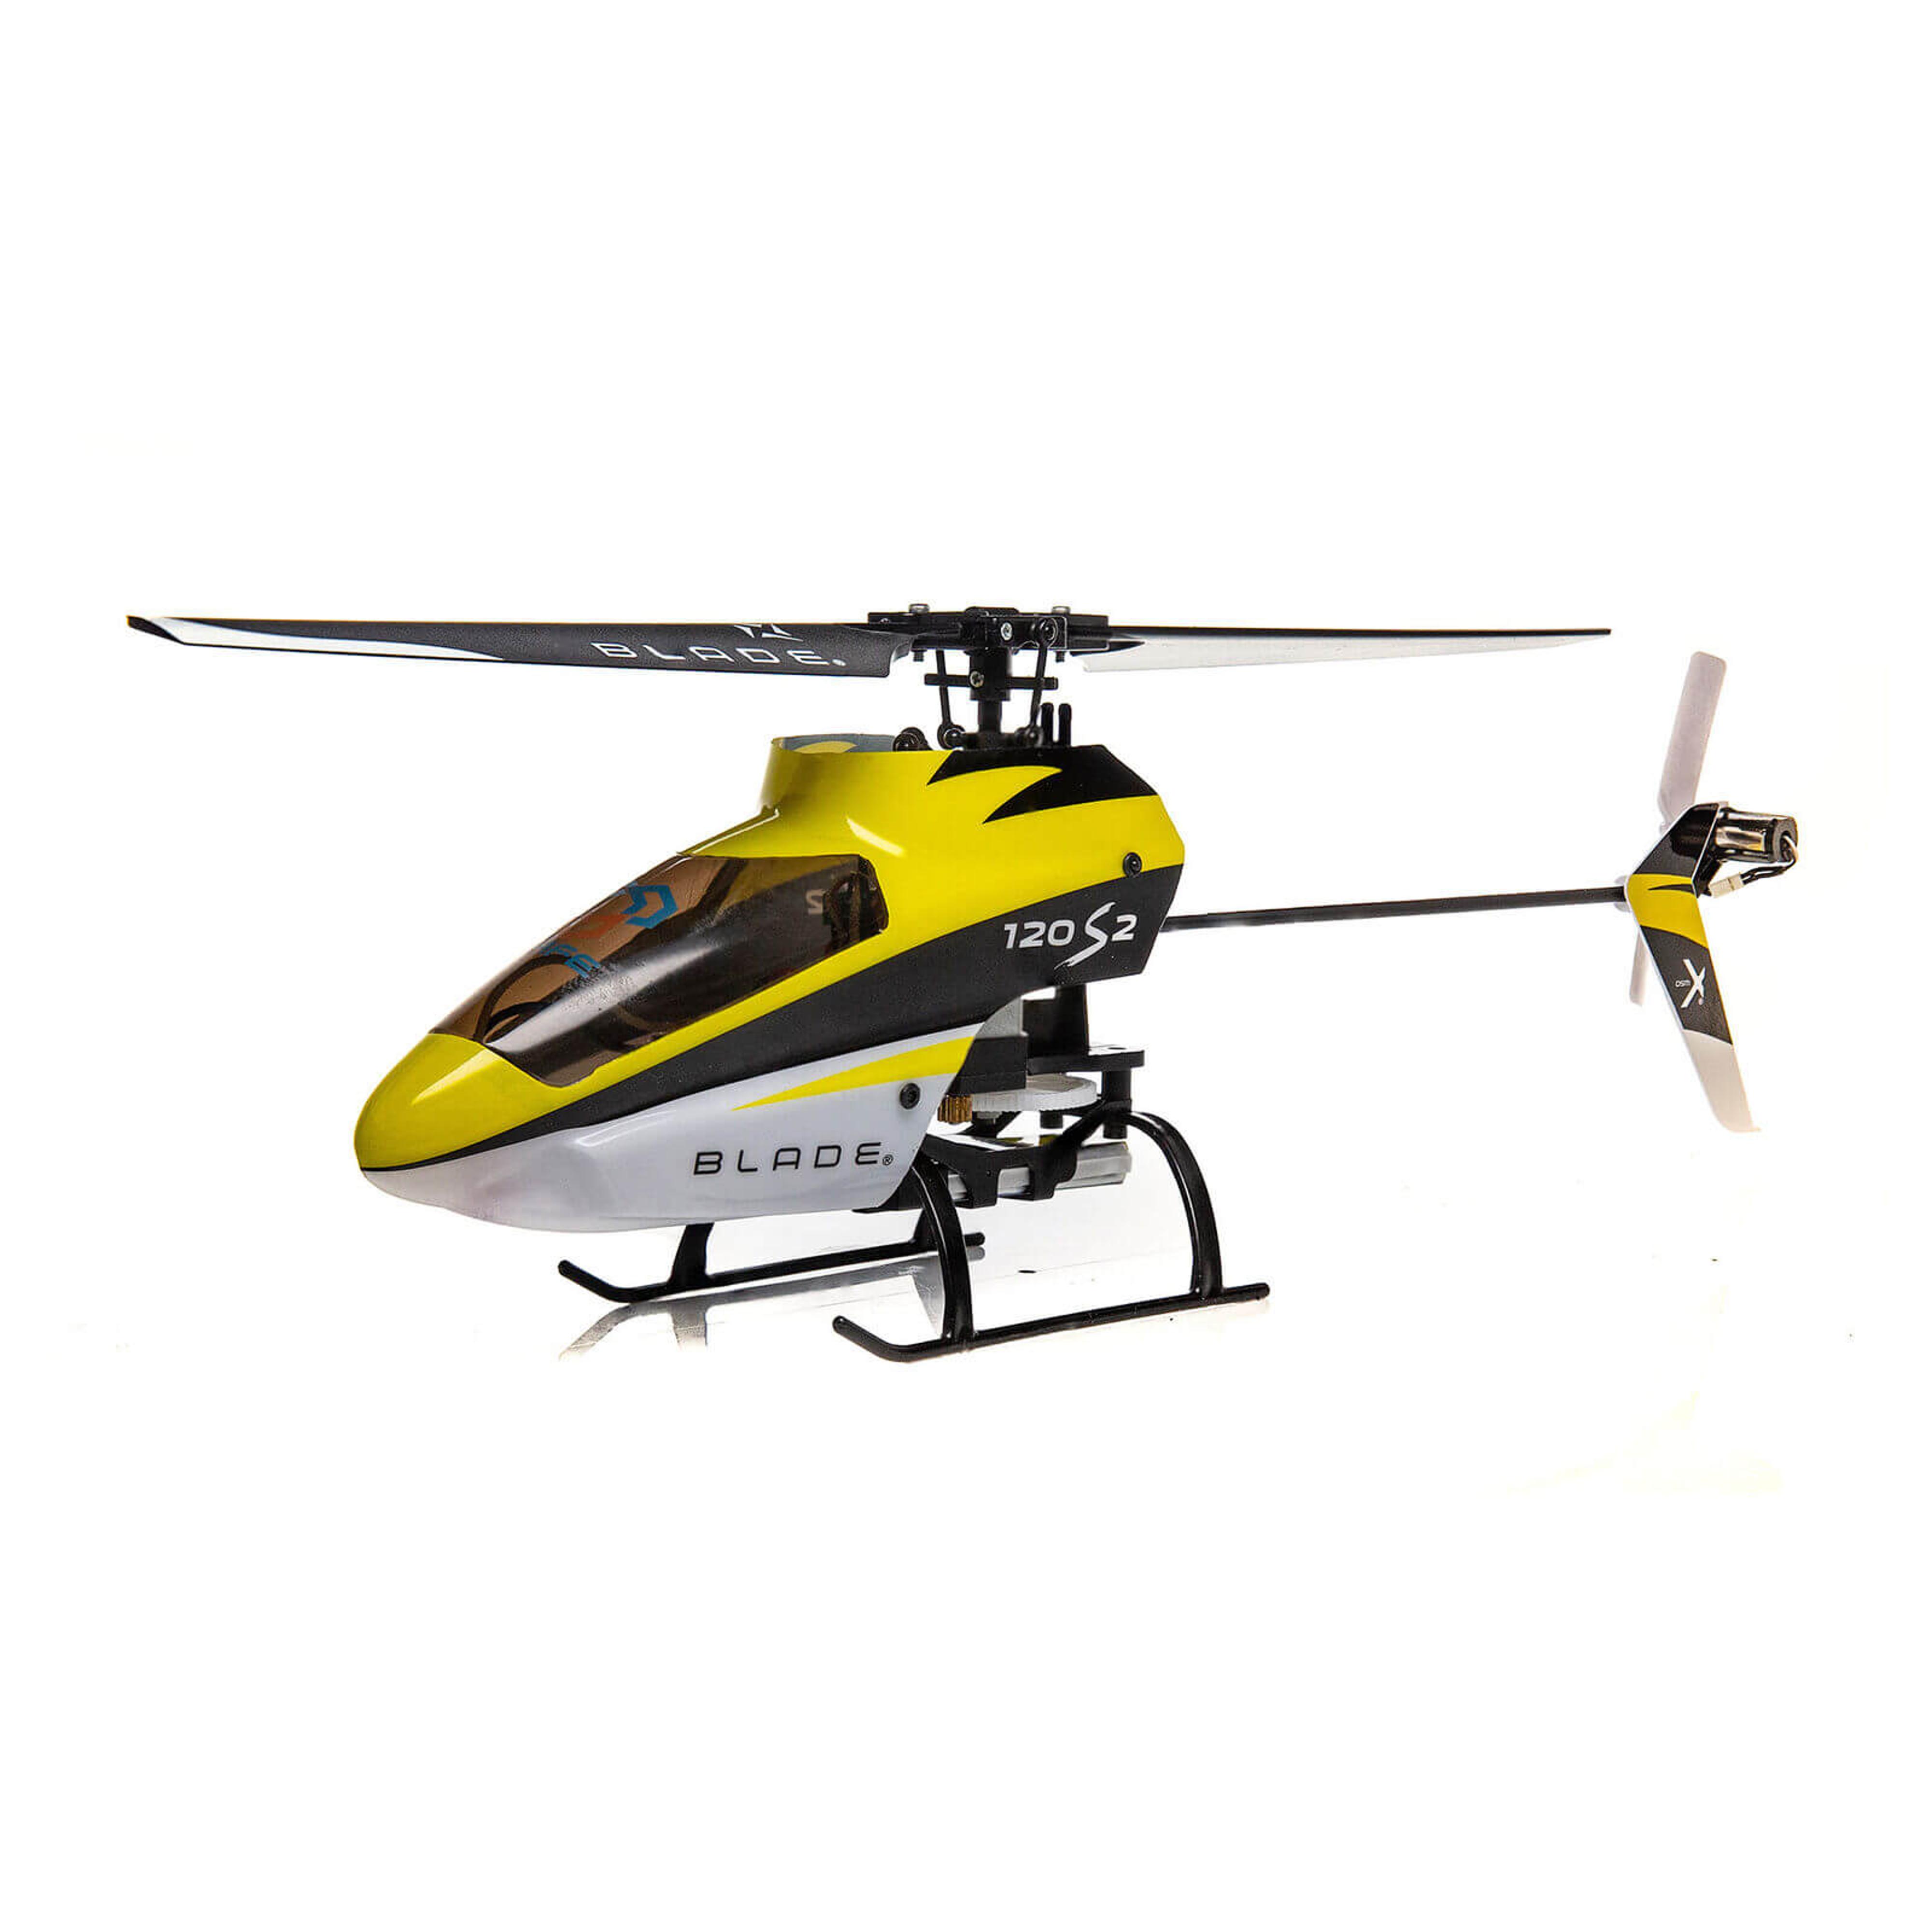 120 S2 Bind-N-Fly R/C Helicopter w/ SAFE